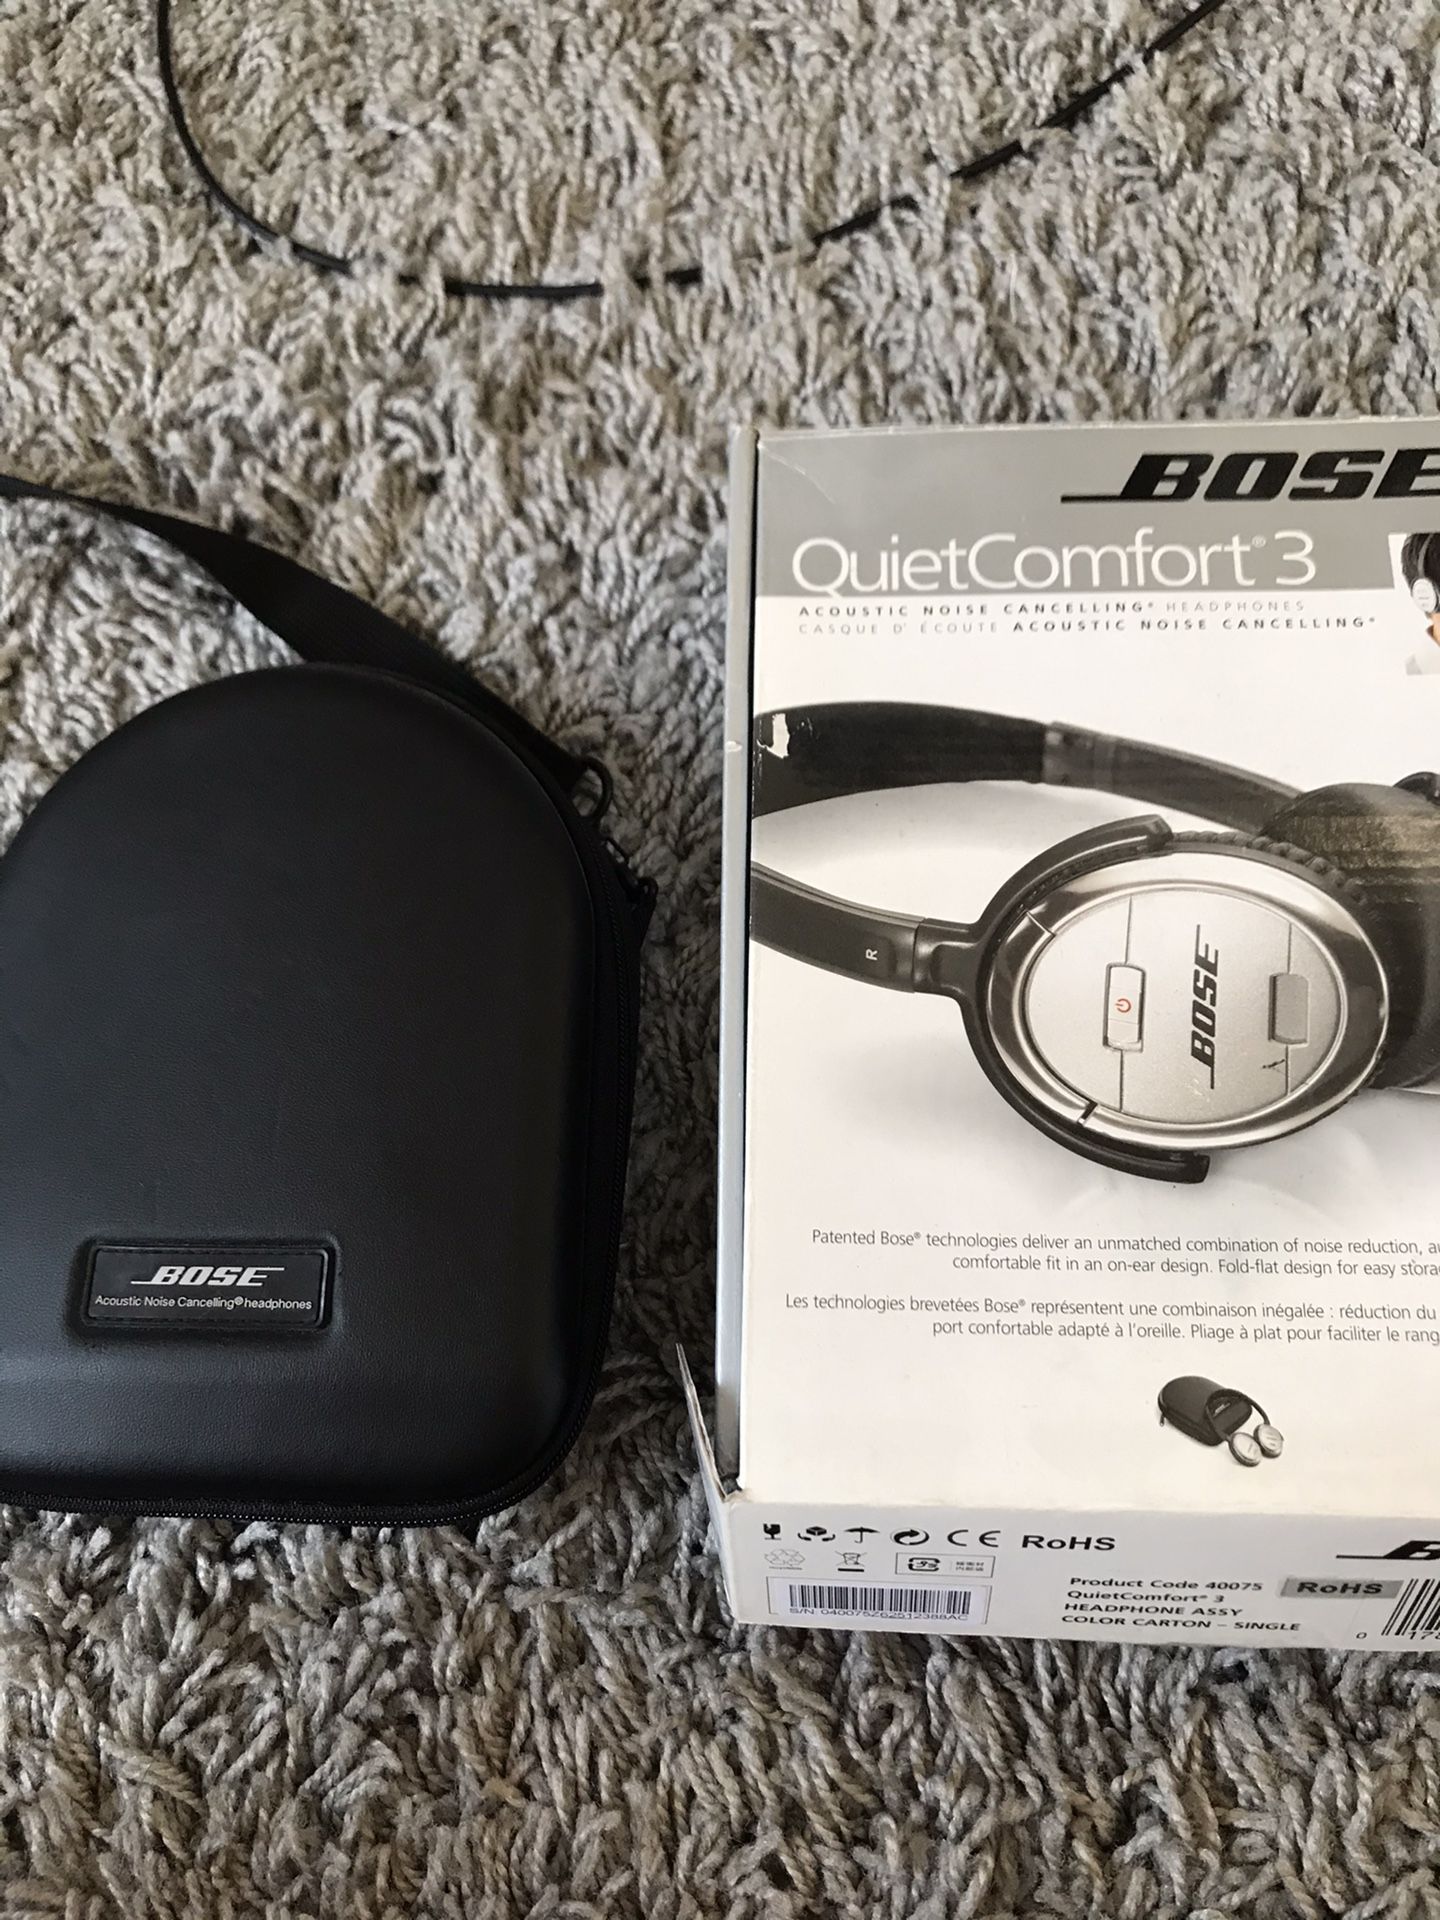 Bose Quiet Comfort 3 QC3 Noise Canceling Headphones + PS4 mic cable for online gaming